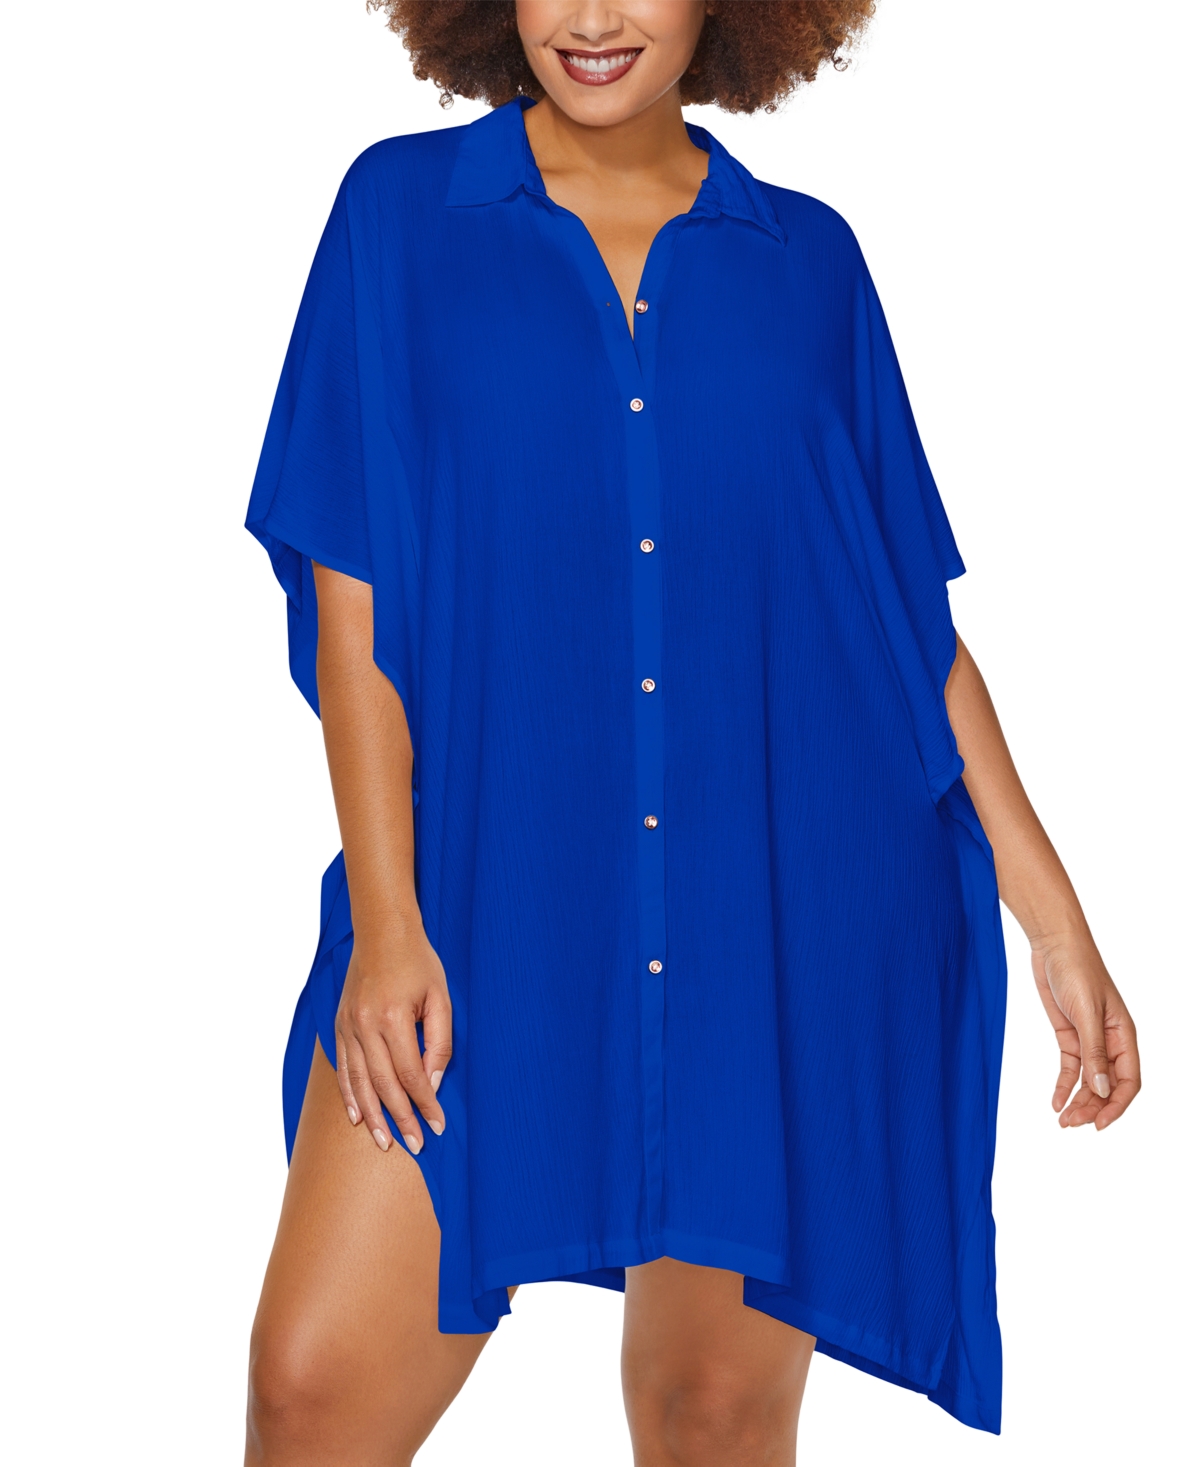 Vacay Button-Up Shirt Cover-Up - Blue Sport